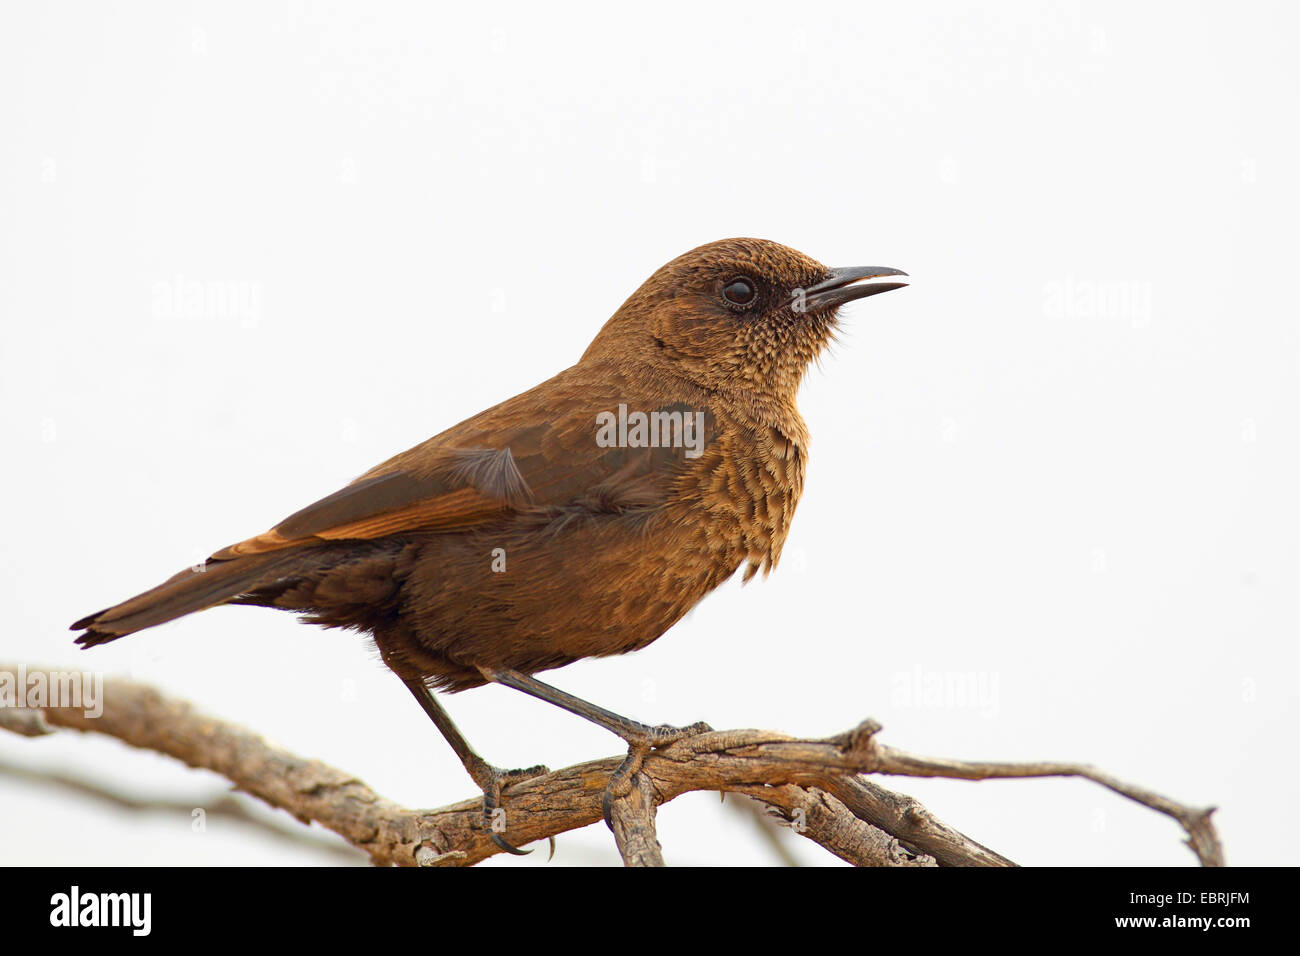 Southern anteater chat (Myrmecocichla formicivora), sits on a shrub, South Africa, North West Province, Barberspan Bird Sanctuary Stock Photo